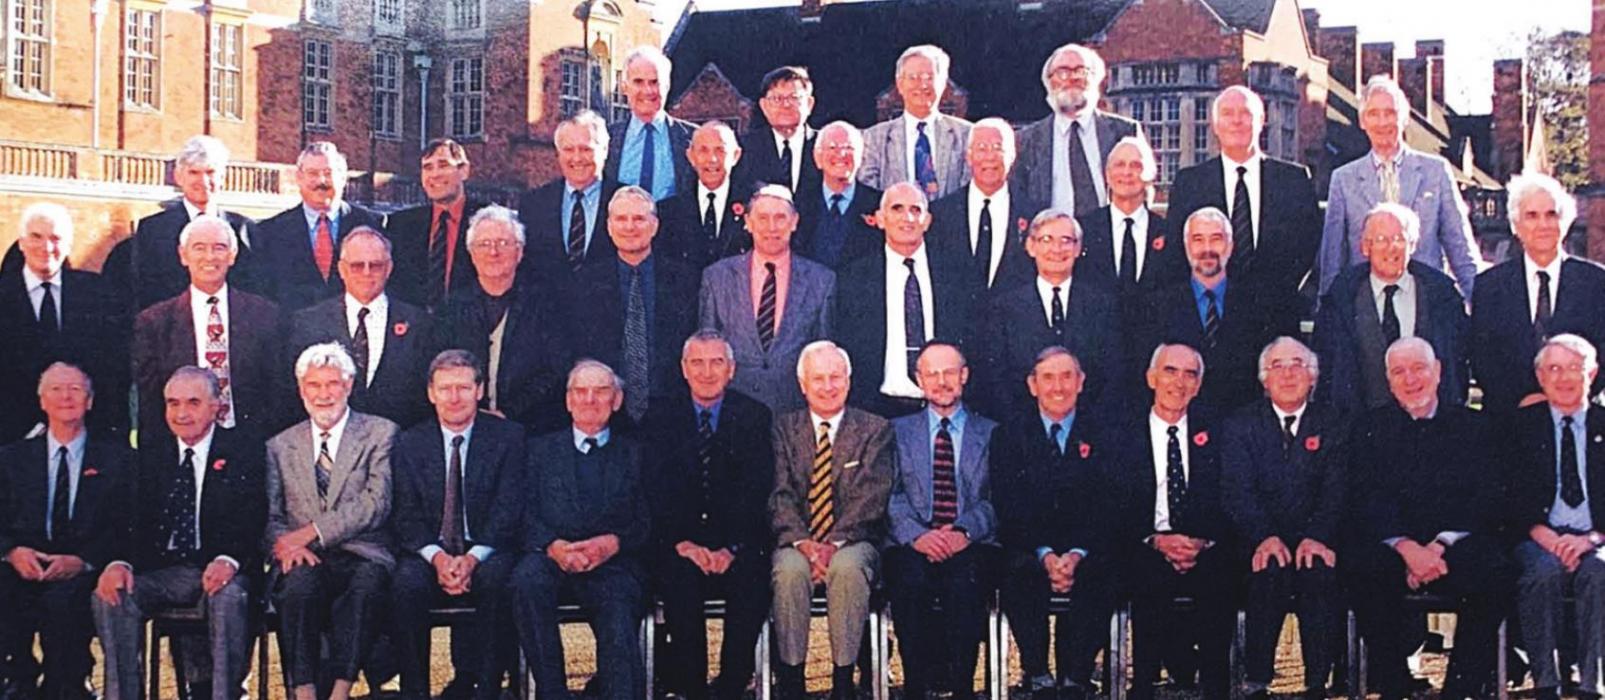 In 2000, alumni of Middleton B House at Christ’s Hospital gathered. This reunion of Old Blues included Richard (third row from front, fourth from left) and his brother, James (front row, far left).